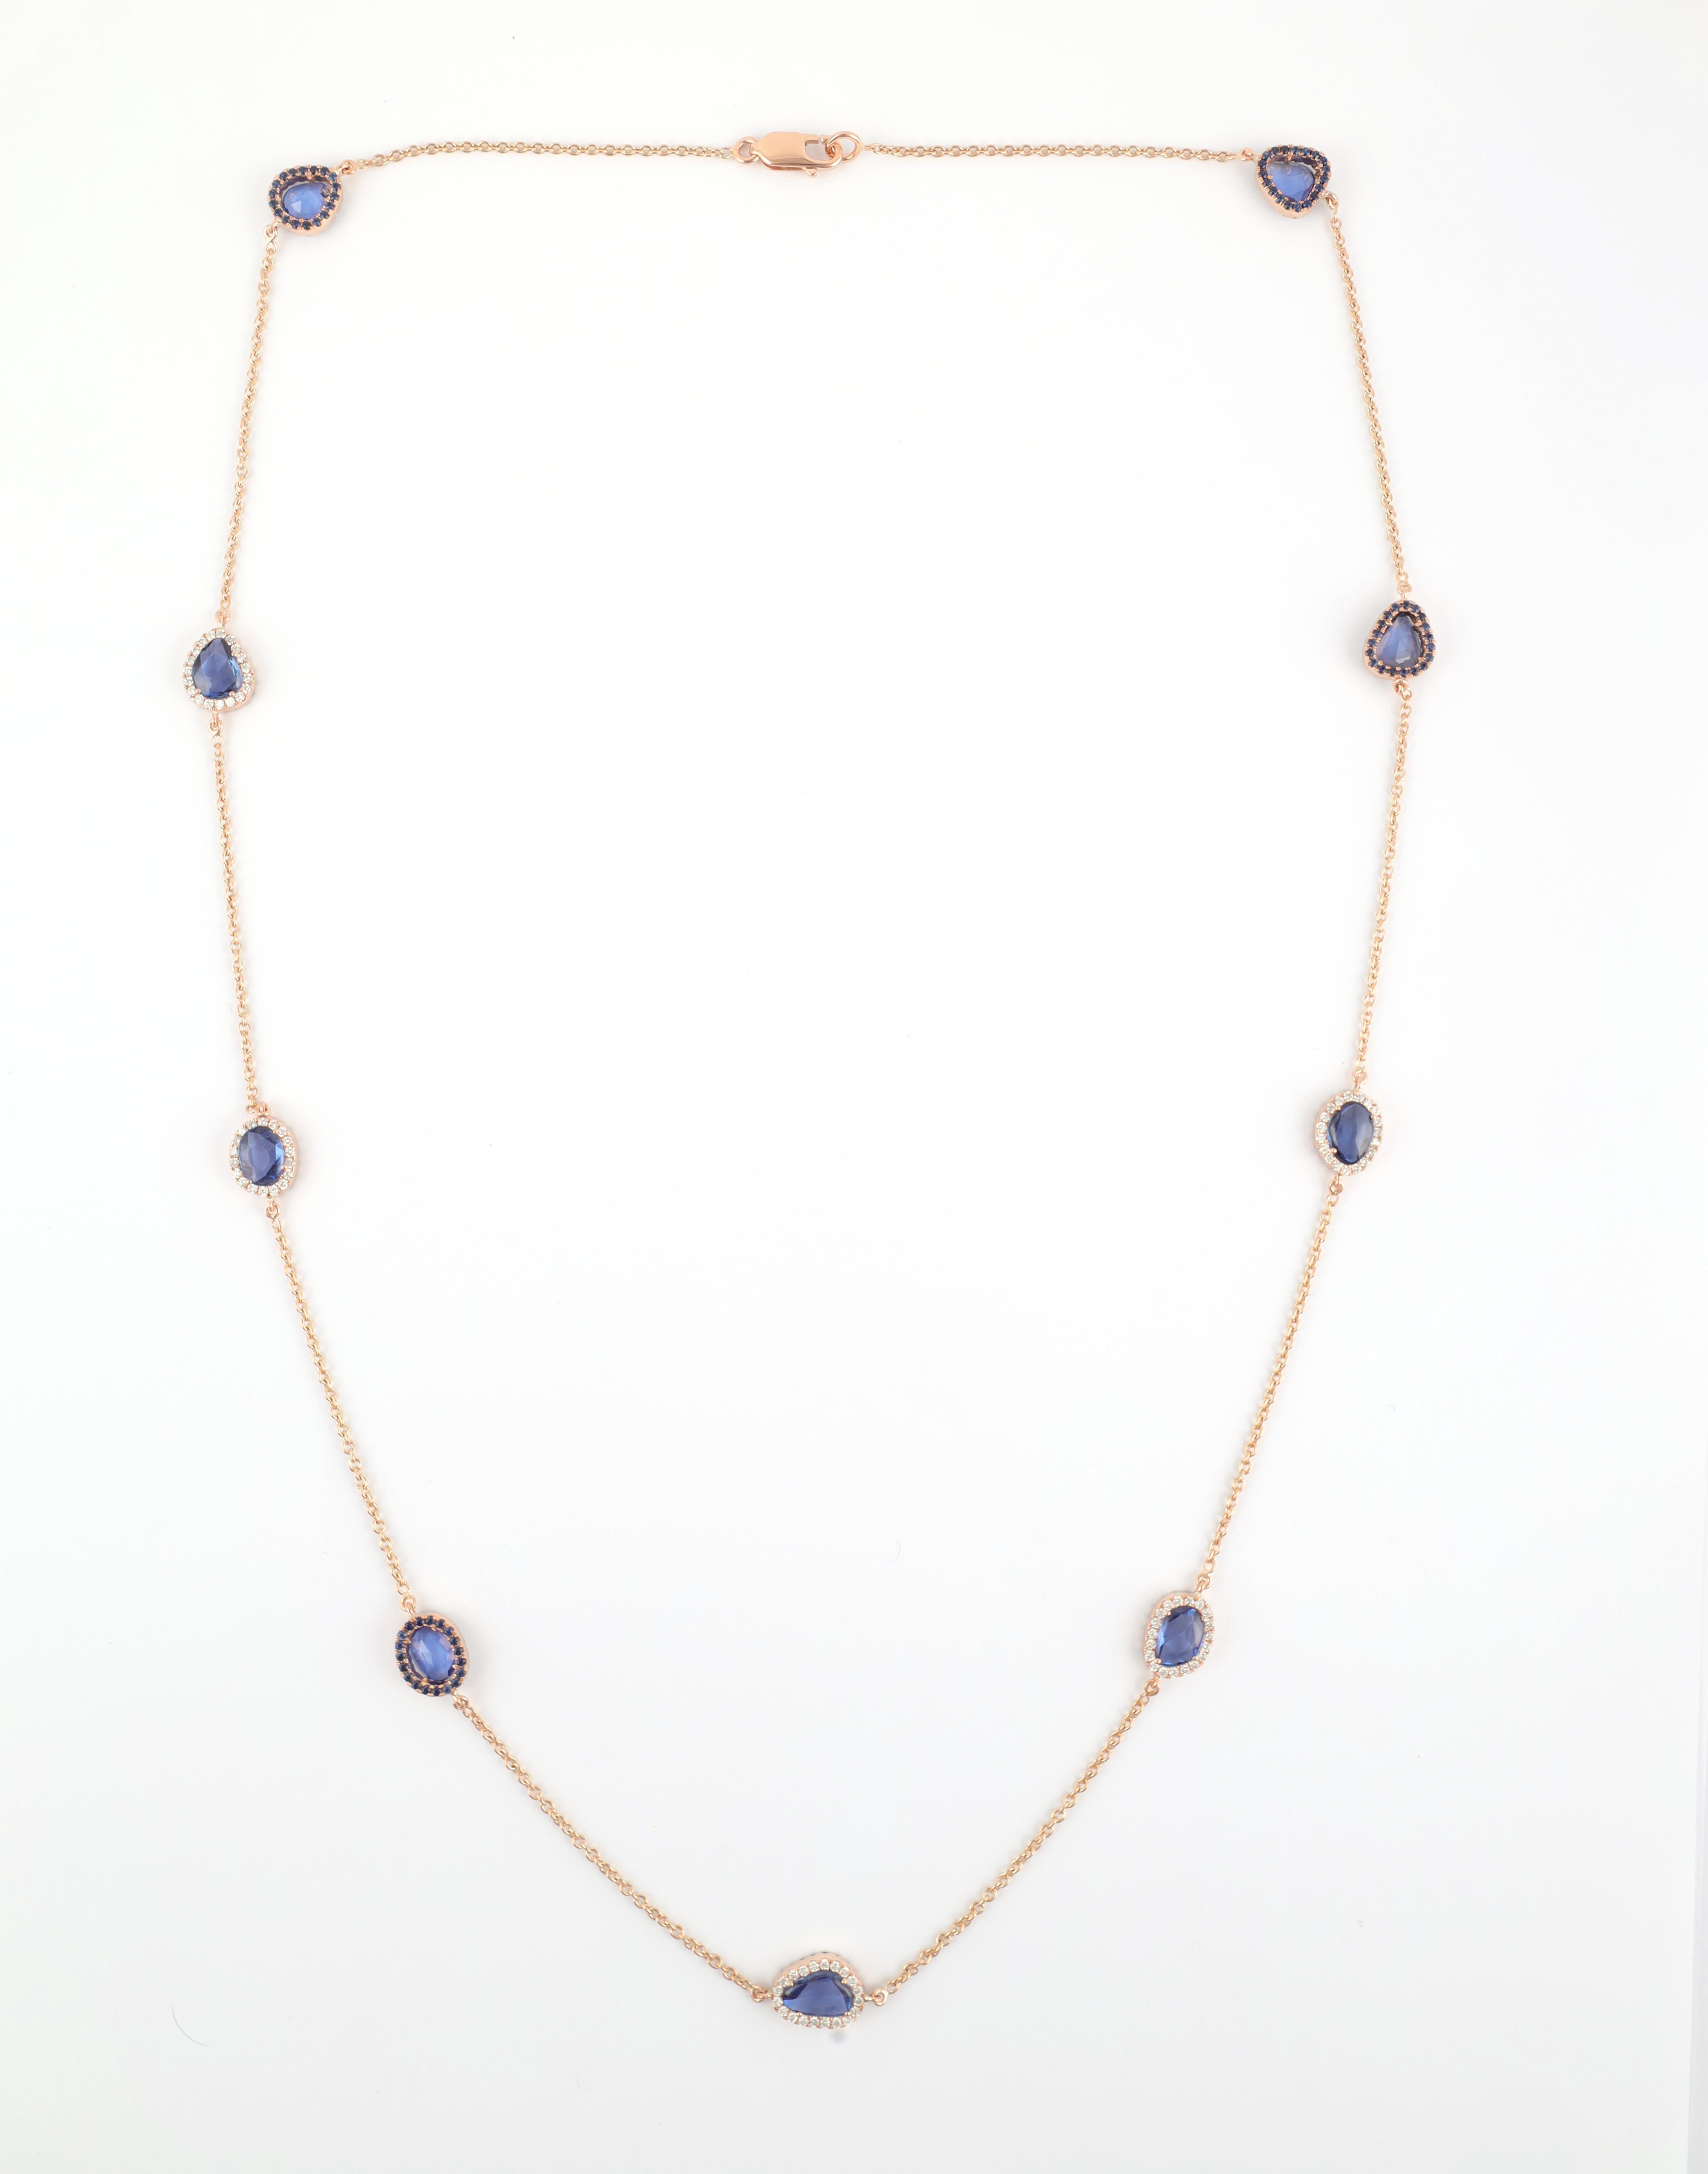 Blue Sapphire Reversible Necklace in 18K Rose Gold studded with mix cut sapphire pieces.
Accessorize your look with this elegant Blue sapphire chain necklace. This stunning piece of jewelry instantly elevates a casual look or dressy outfit.